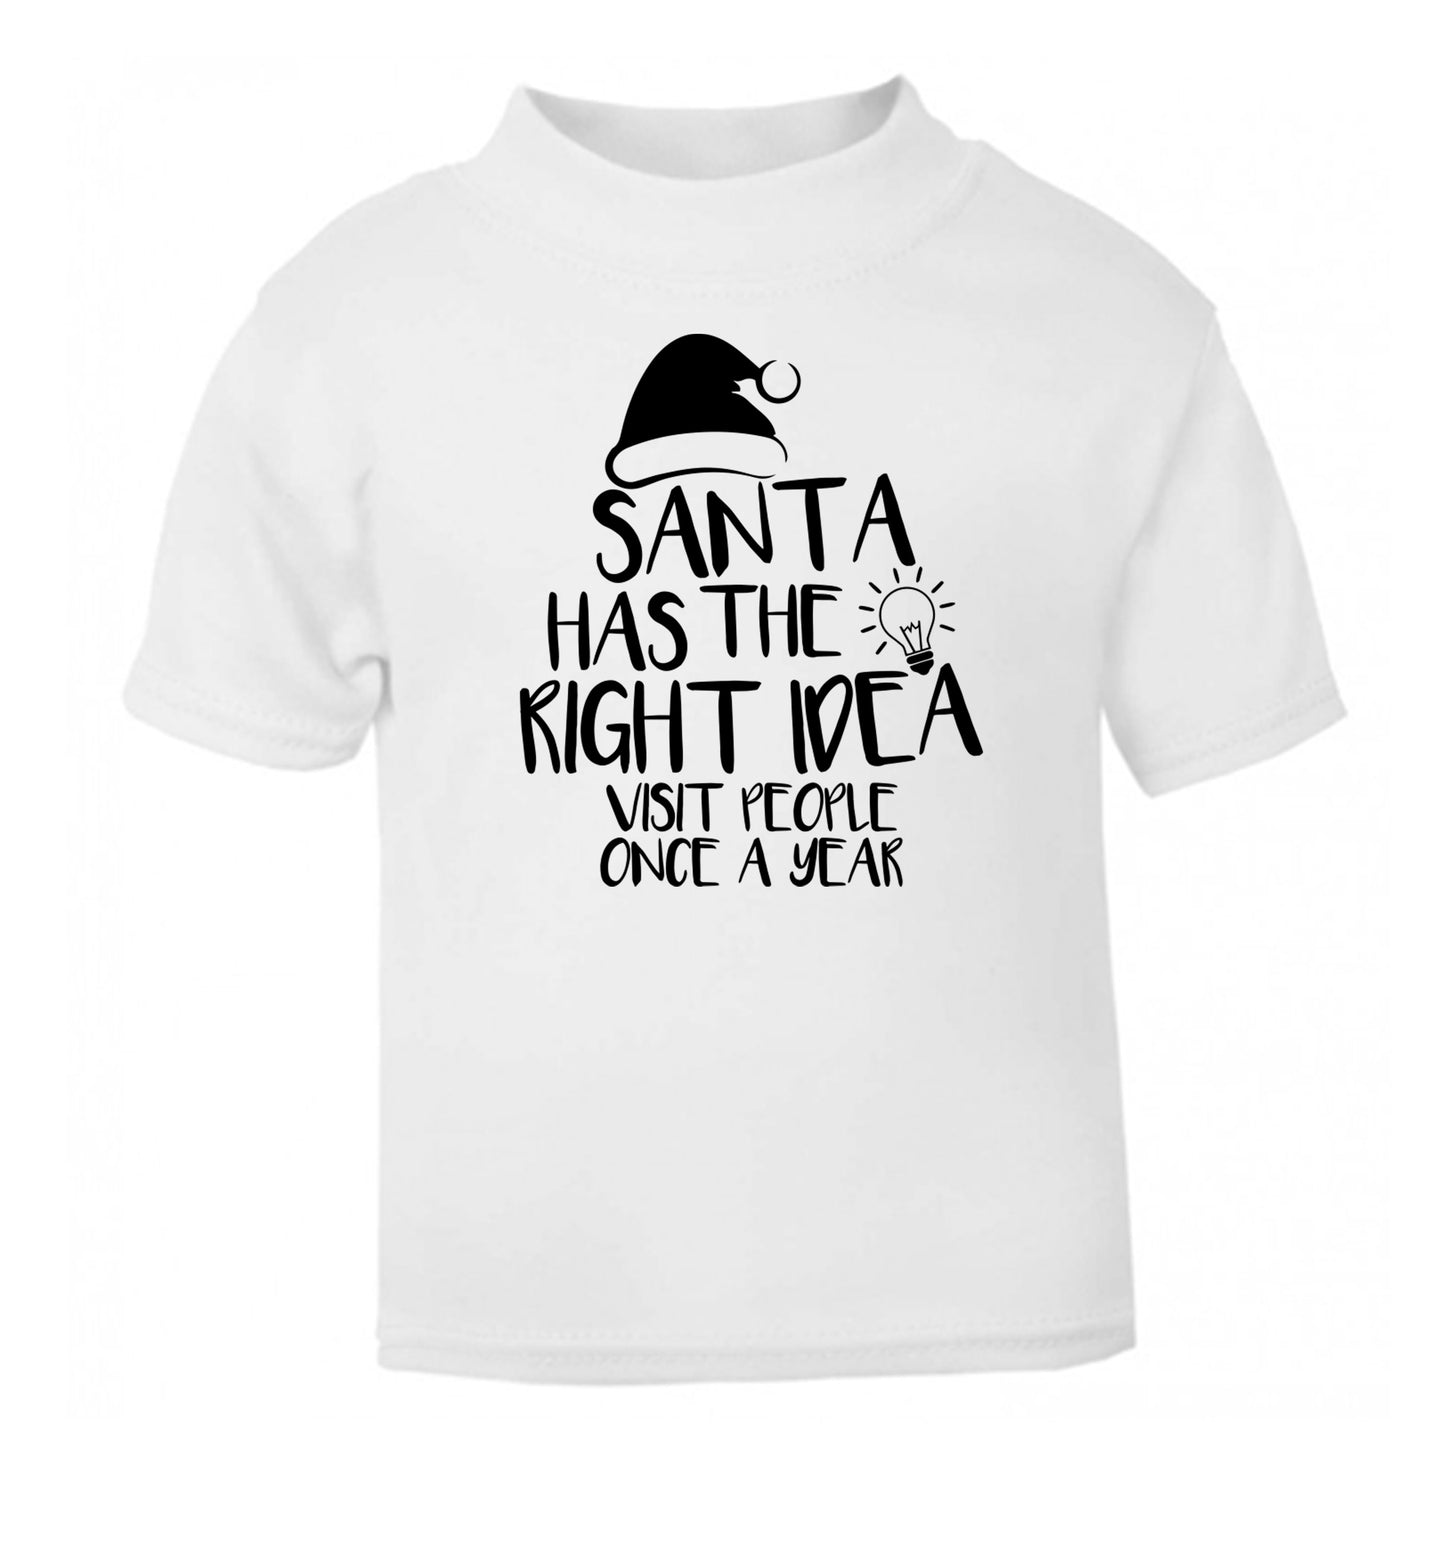 Santa has the right idea visit people once a year white Baby Toddler Tshirt 2 Years